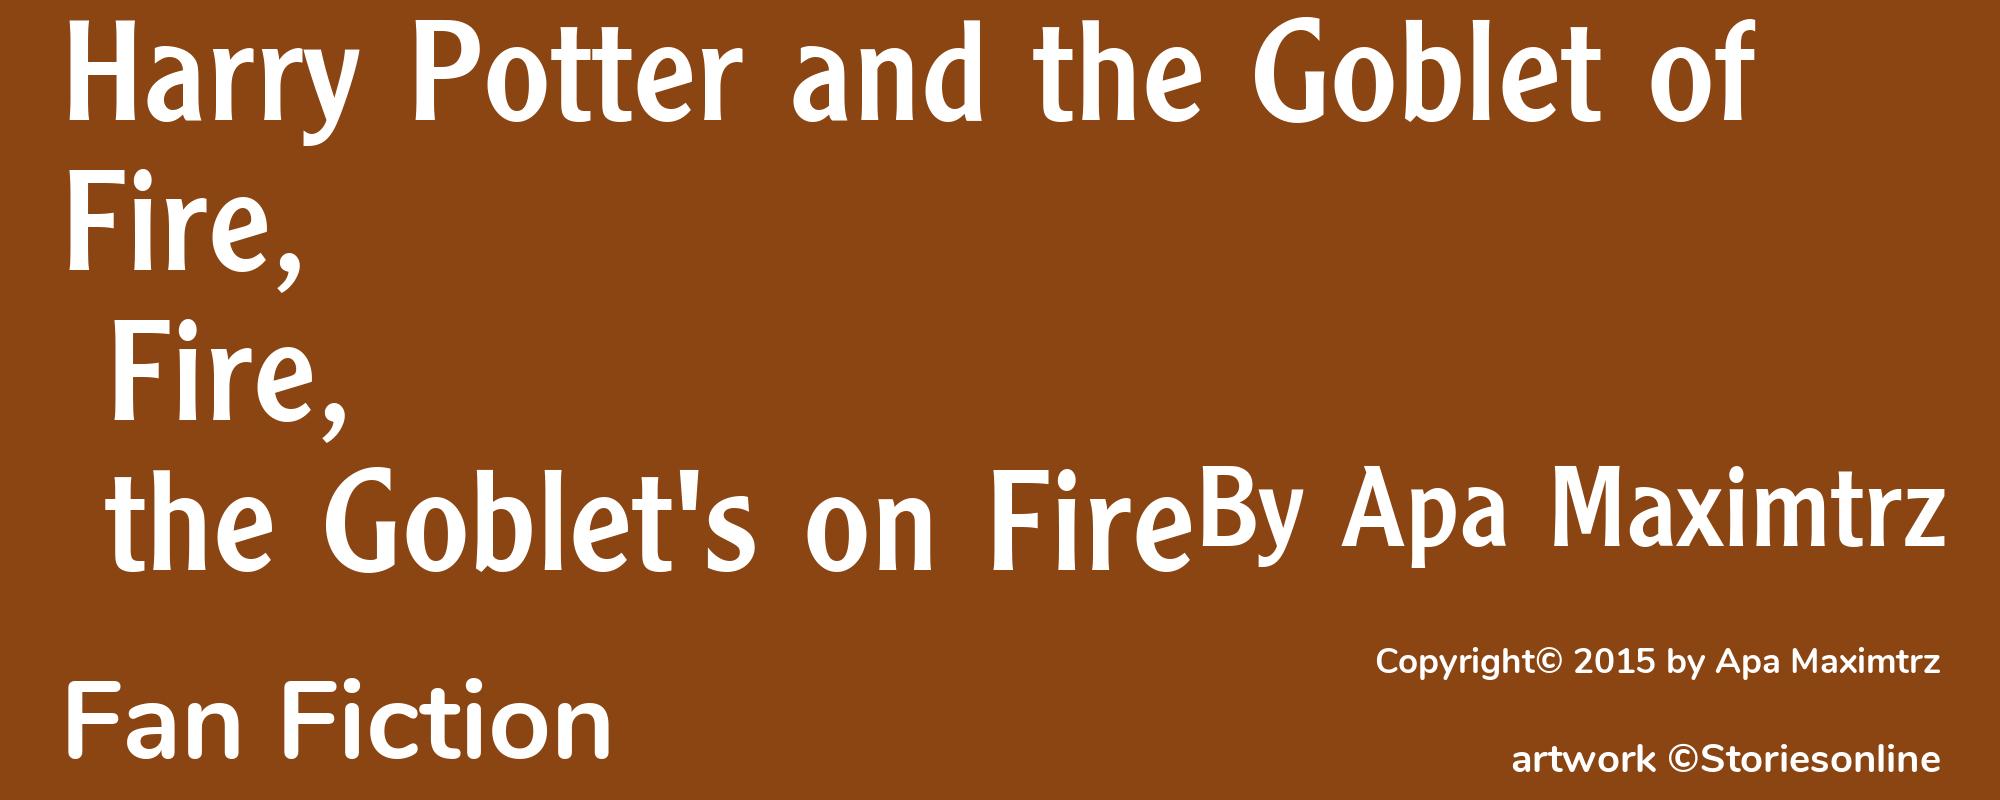 Harry Potter and the Goblet of Fire, Fire, the Goblet's on Fire - Cover